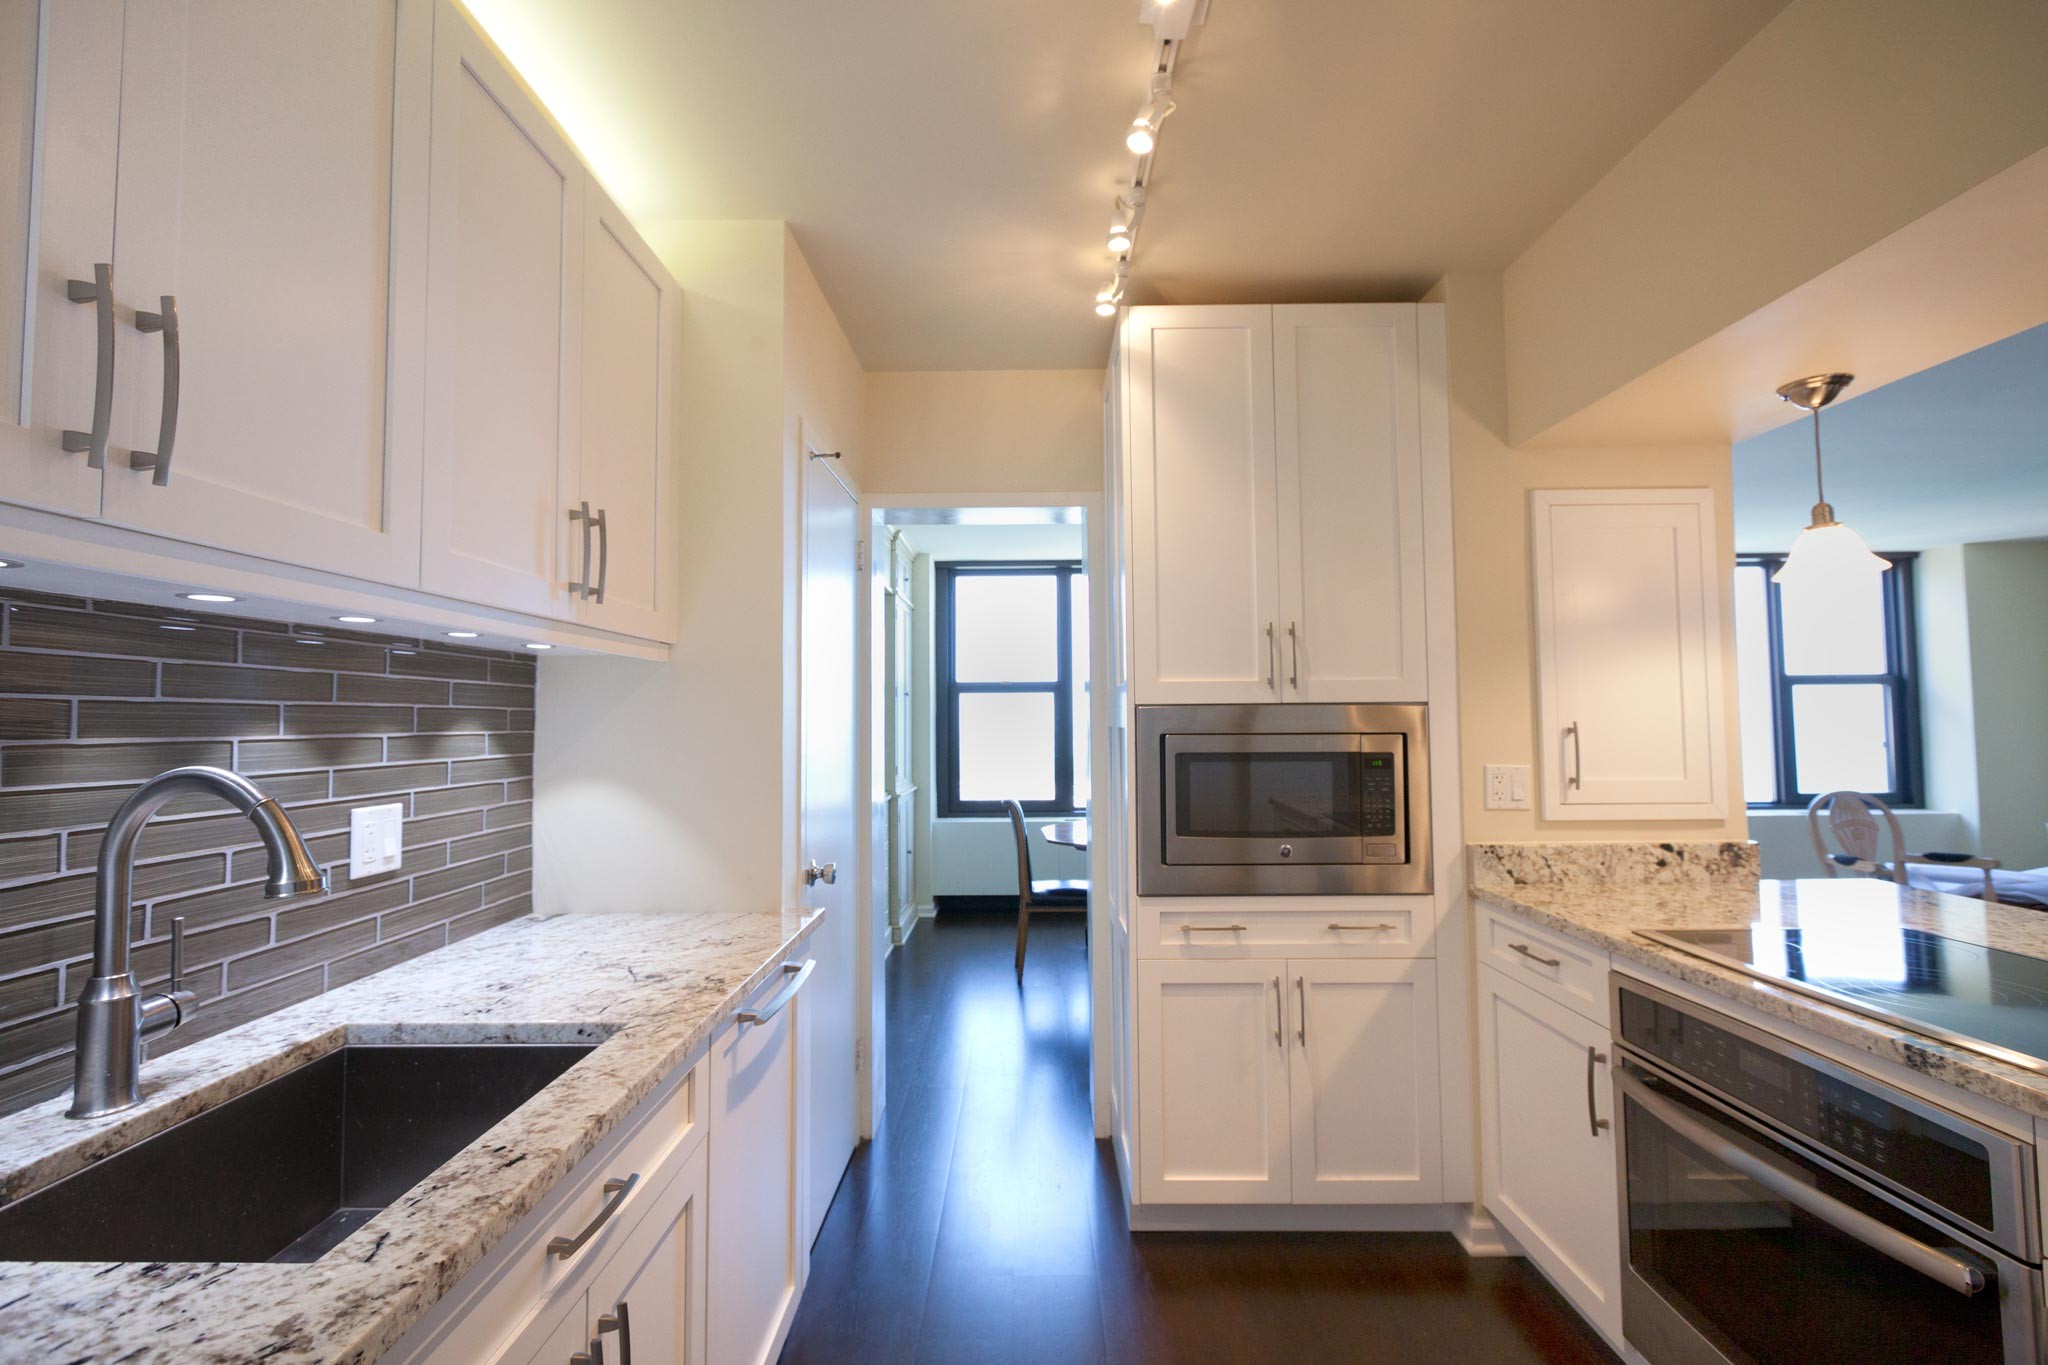 New Old Lakefront Kitchen Chicago-lakeshore-high-rise-transitional-kitchen-6641-2048w